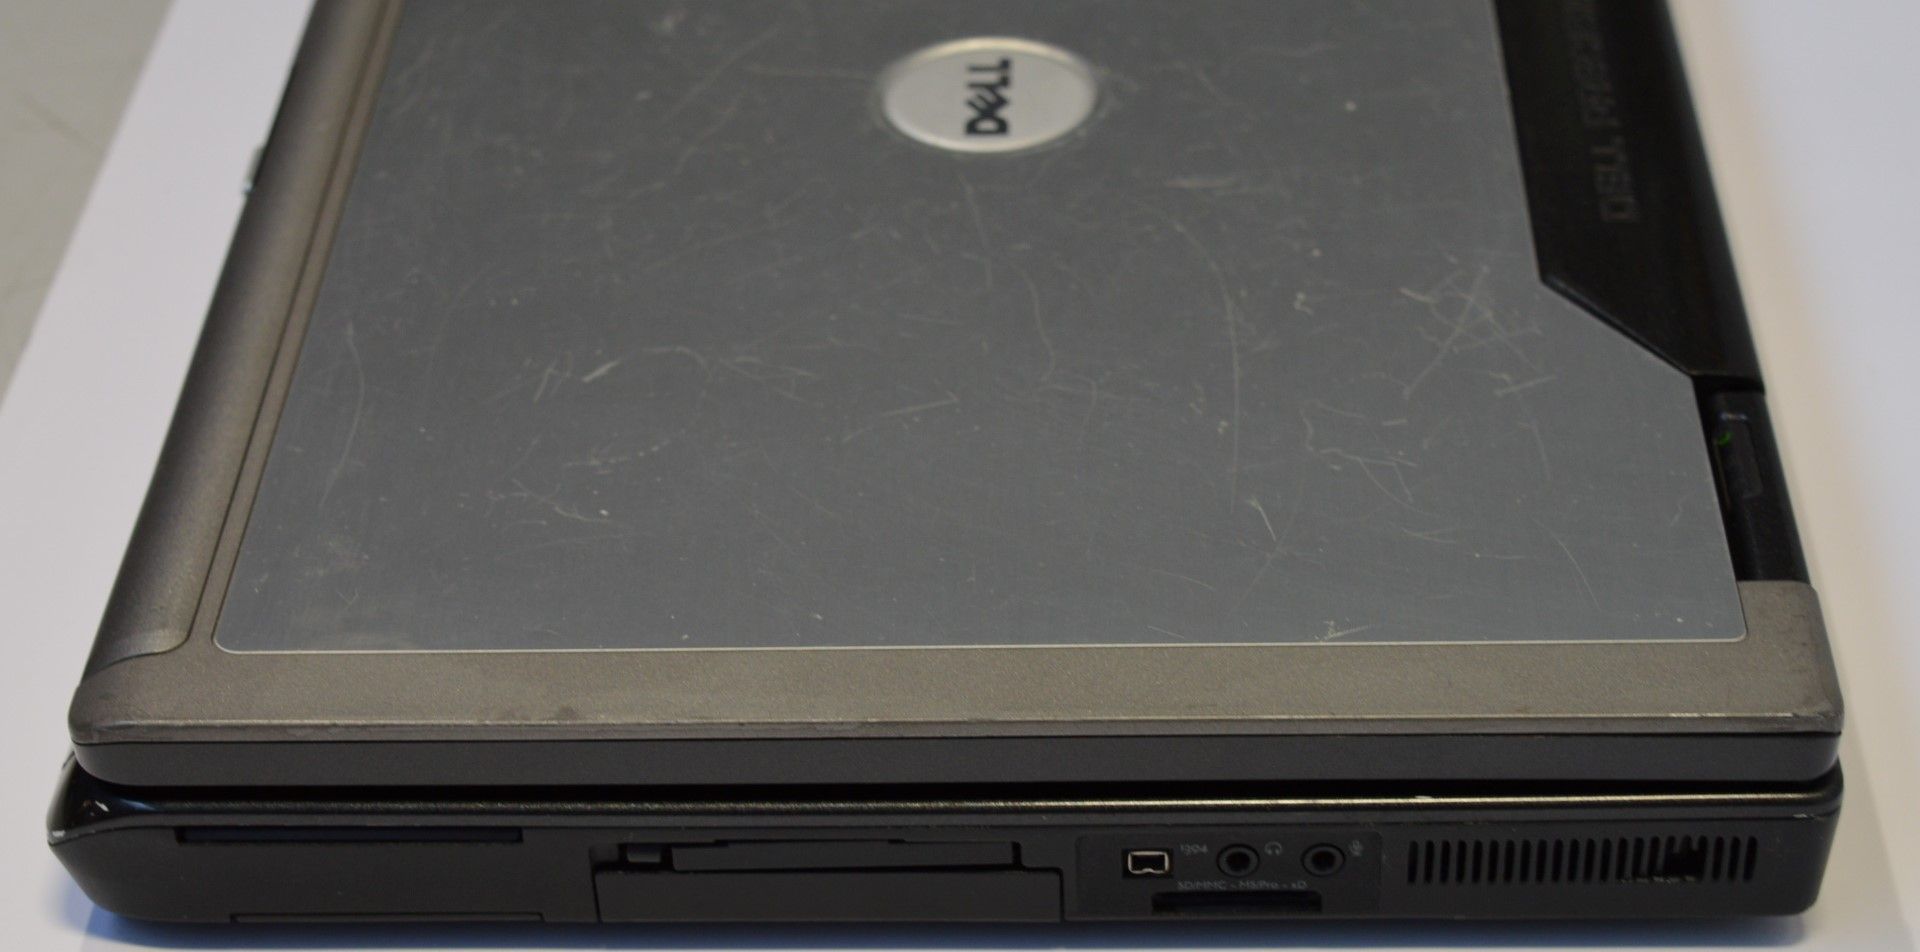 1 x Dell M90 17 Inch Laptop Computer - Features an Intel Core 2 Duo 2.16ghz Processor, 160gb Hard - Image 2 of 12